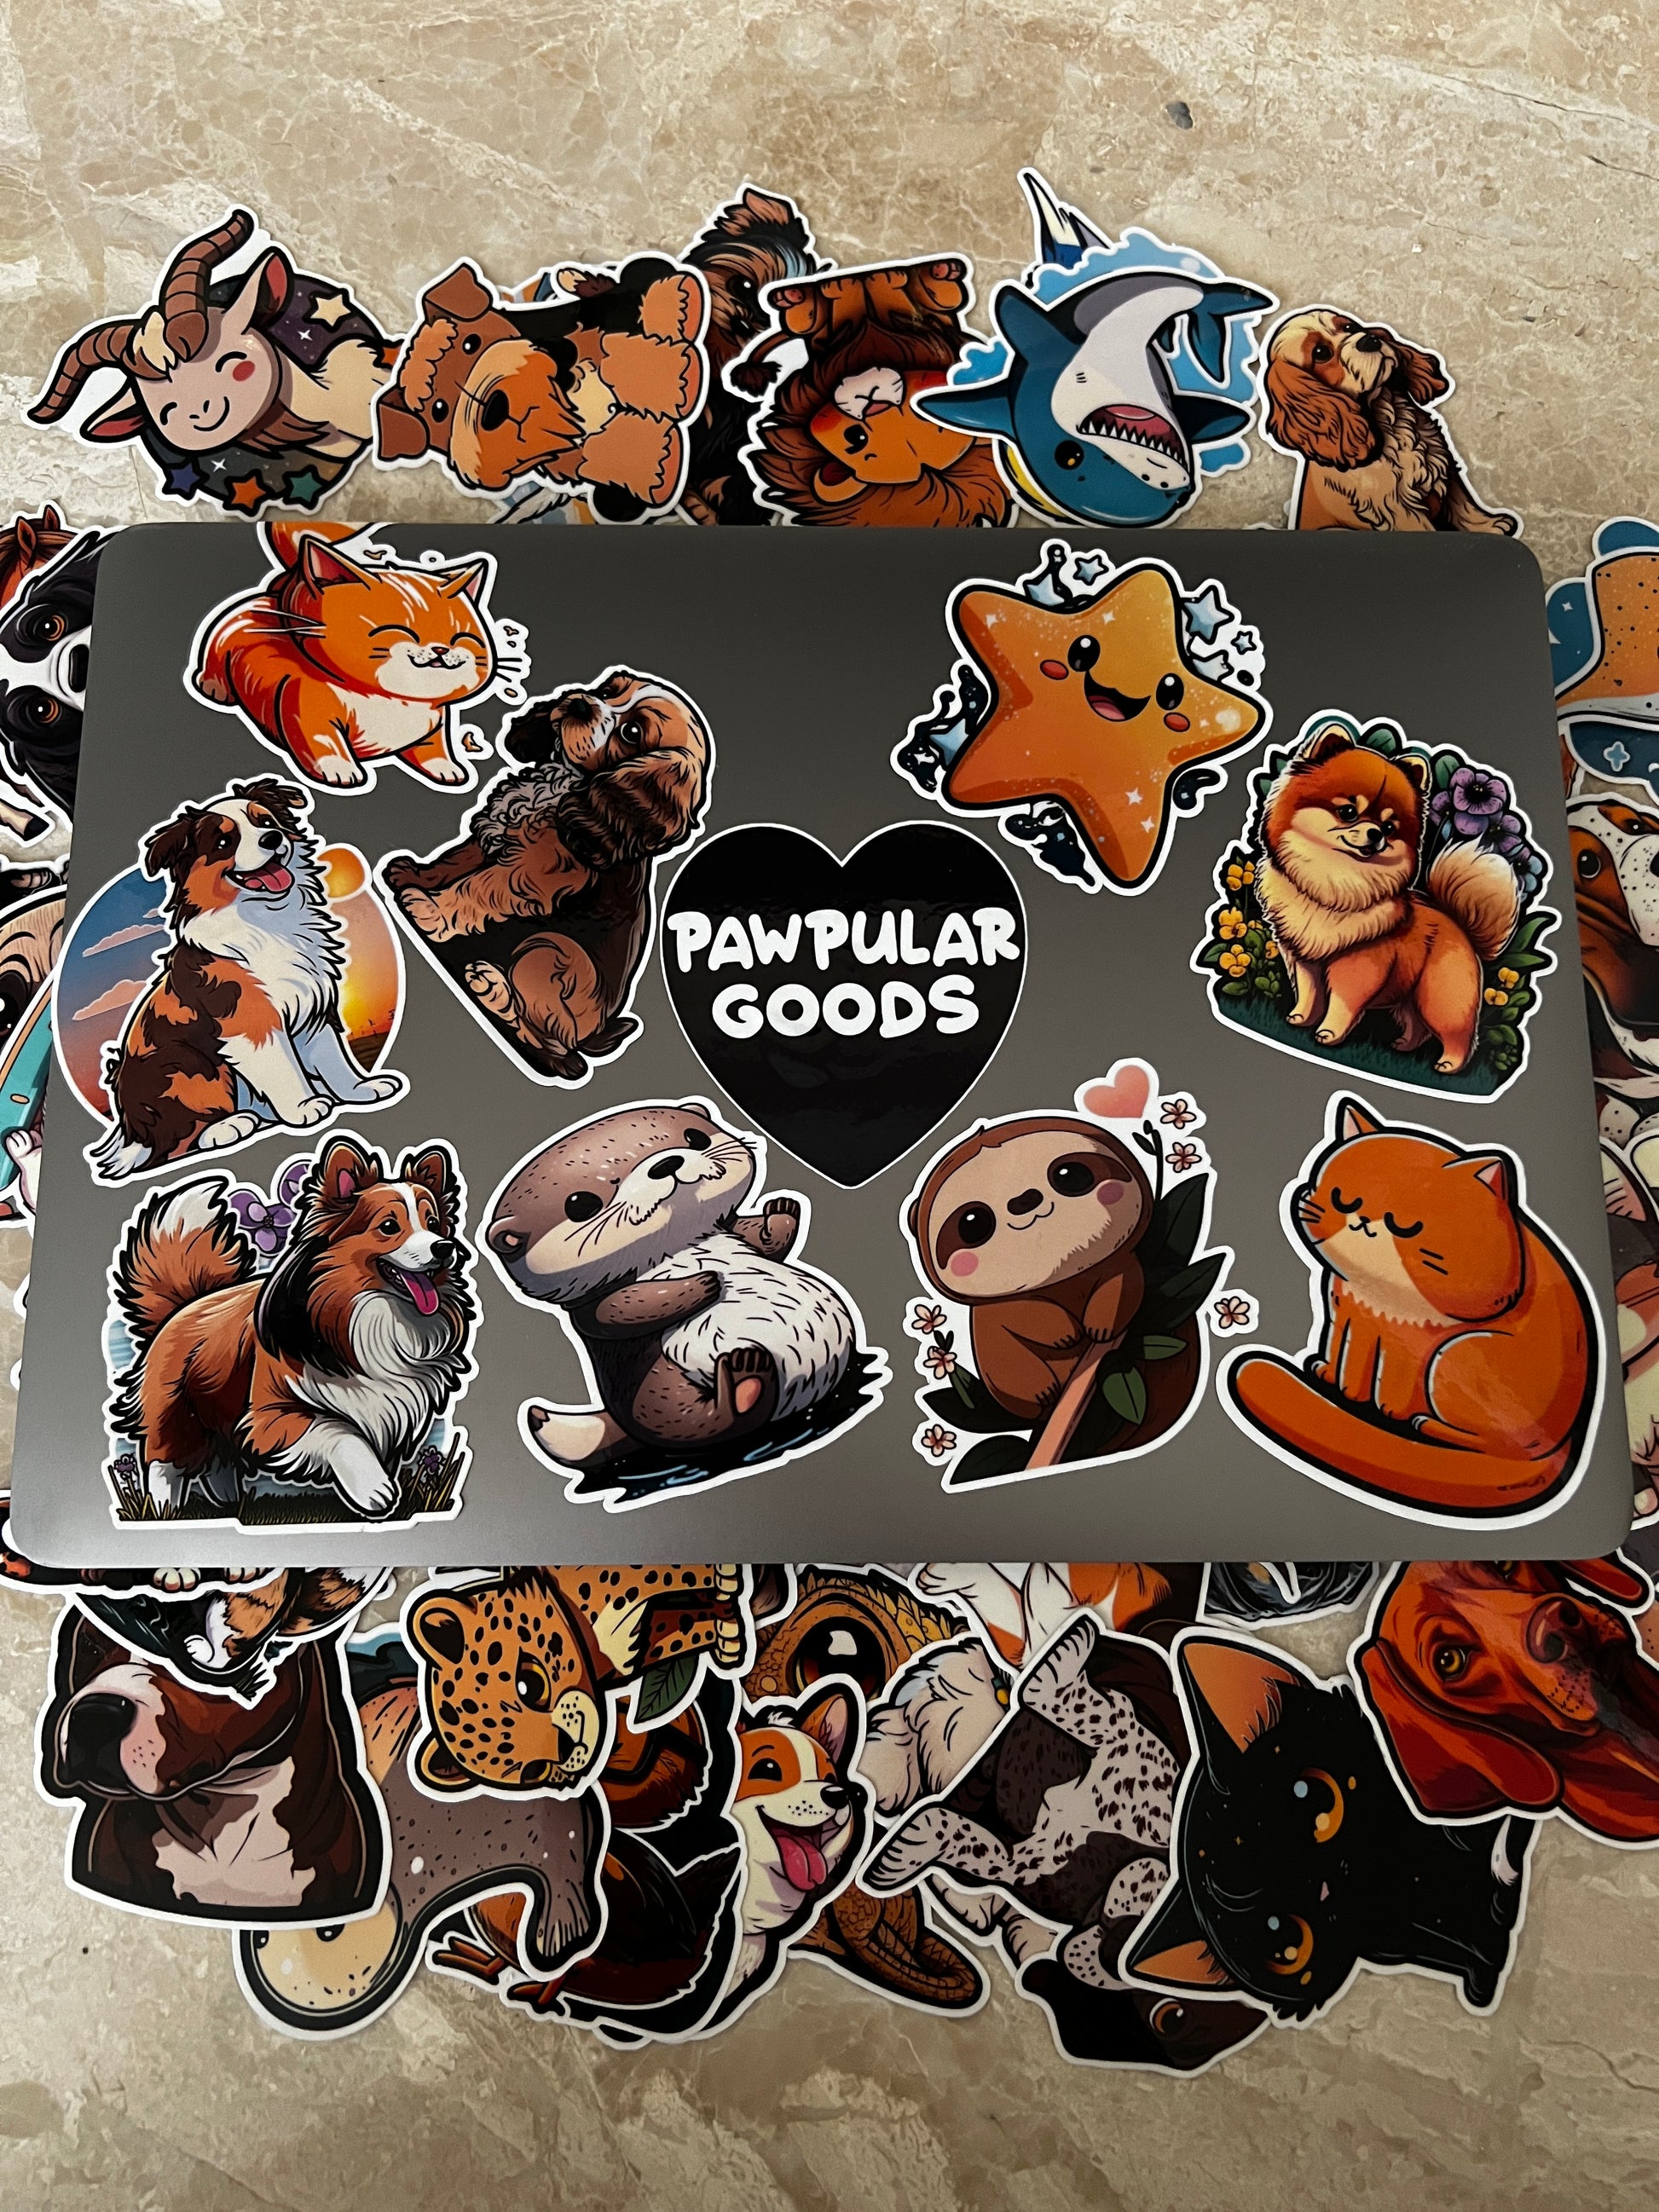 Husky Stickers Pack of 5